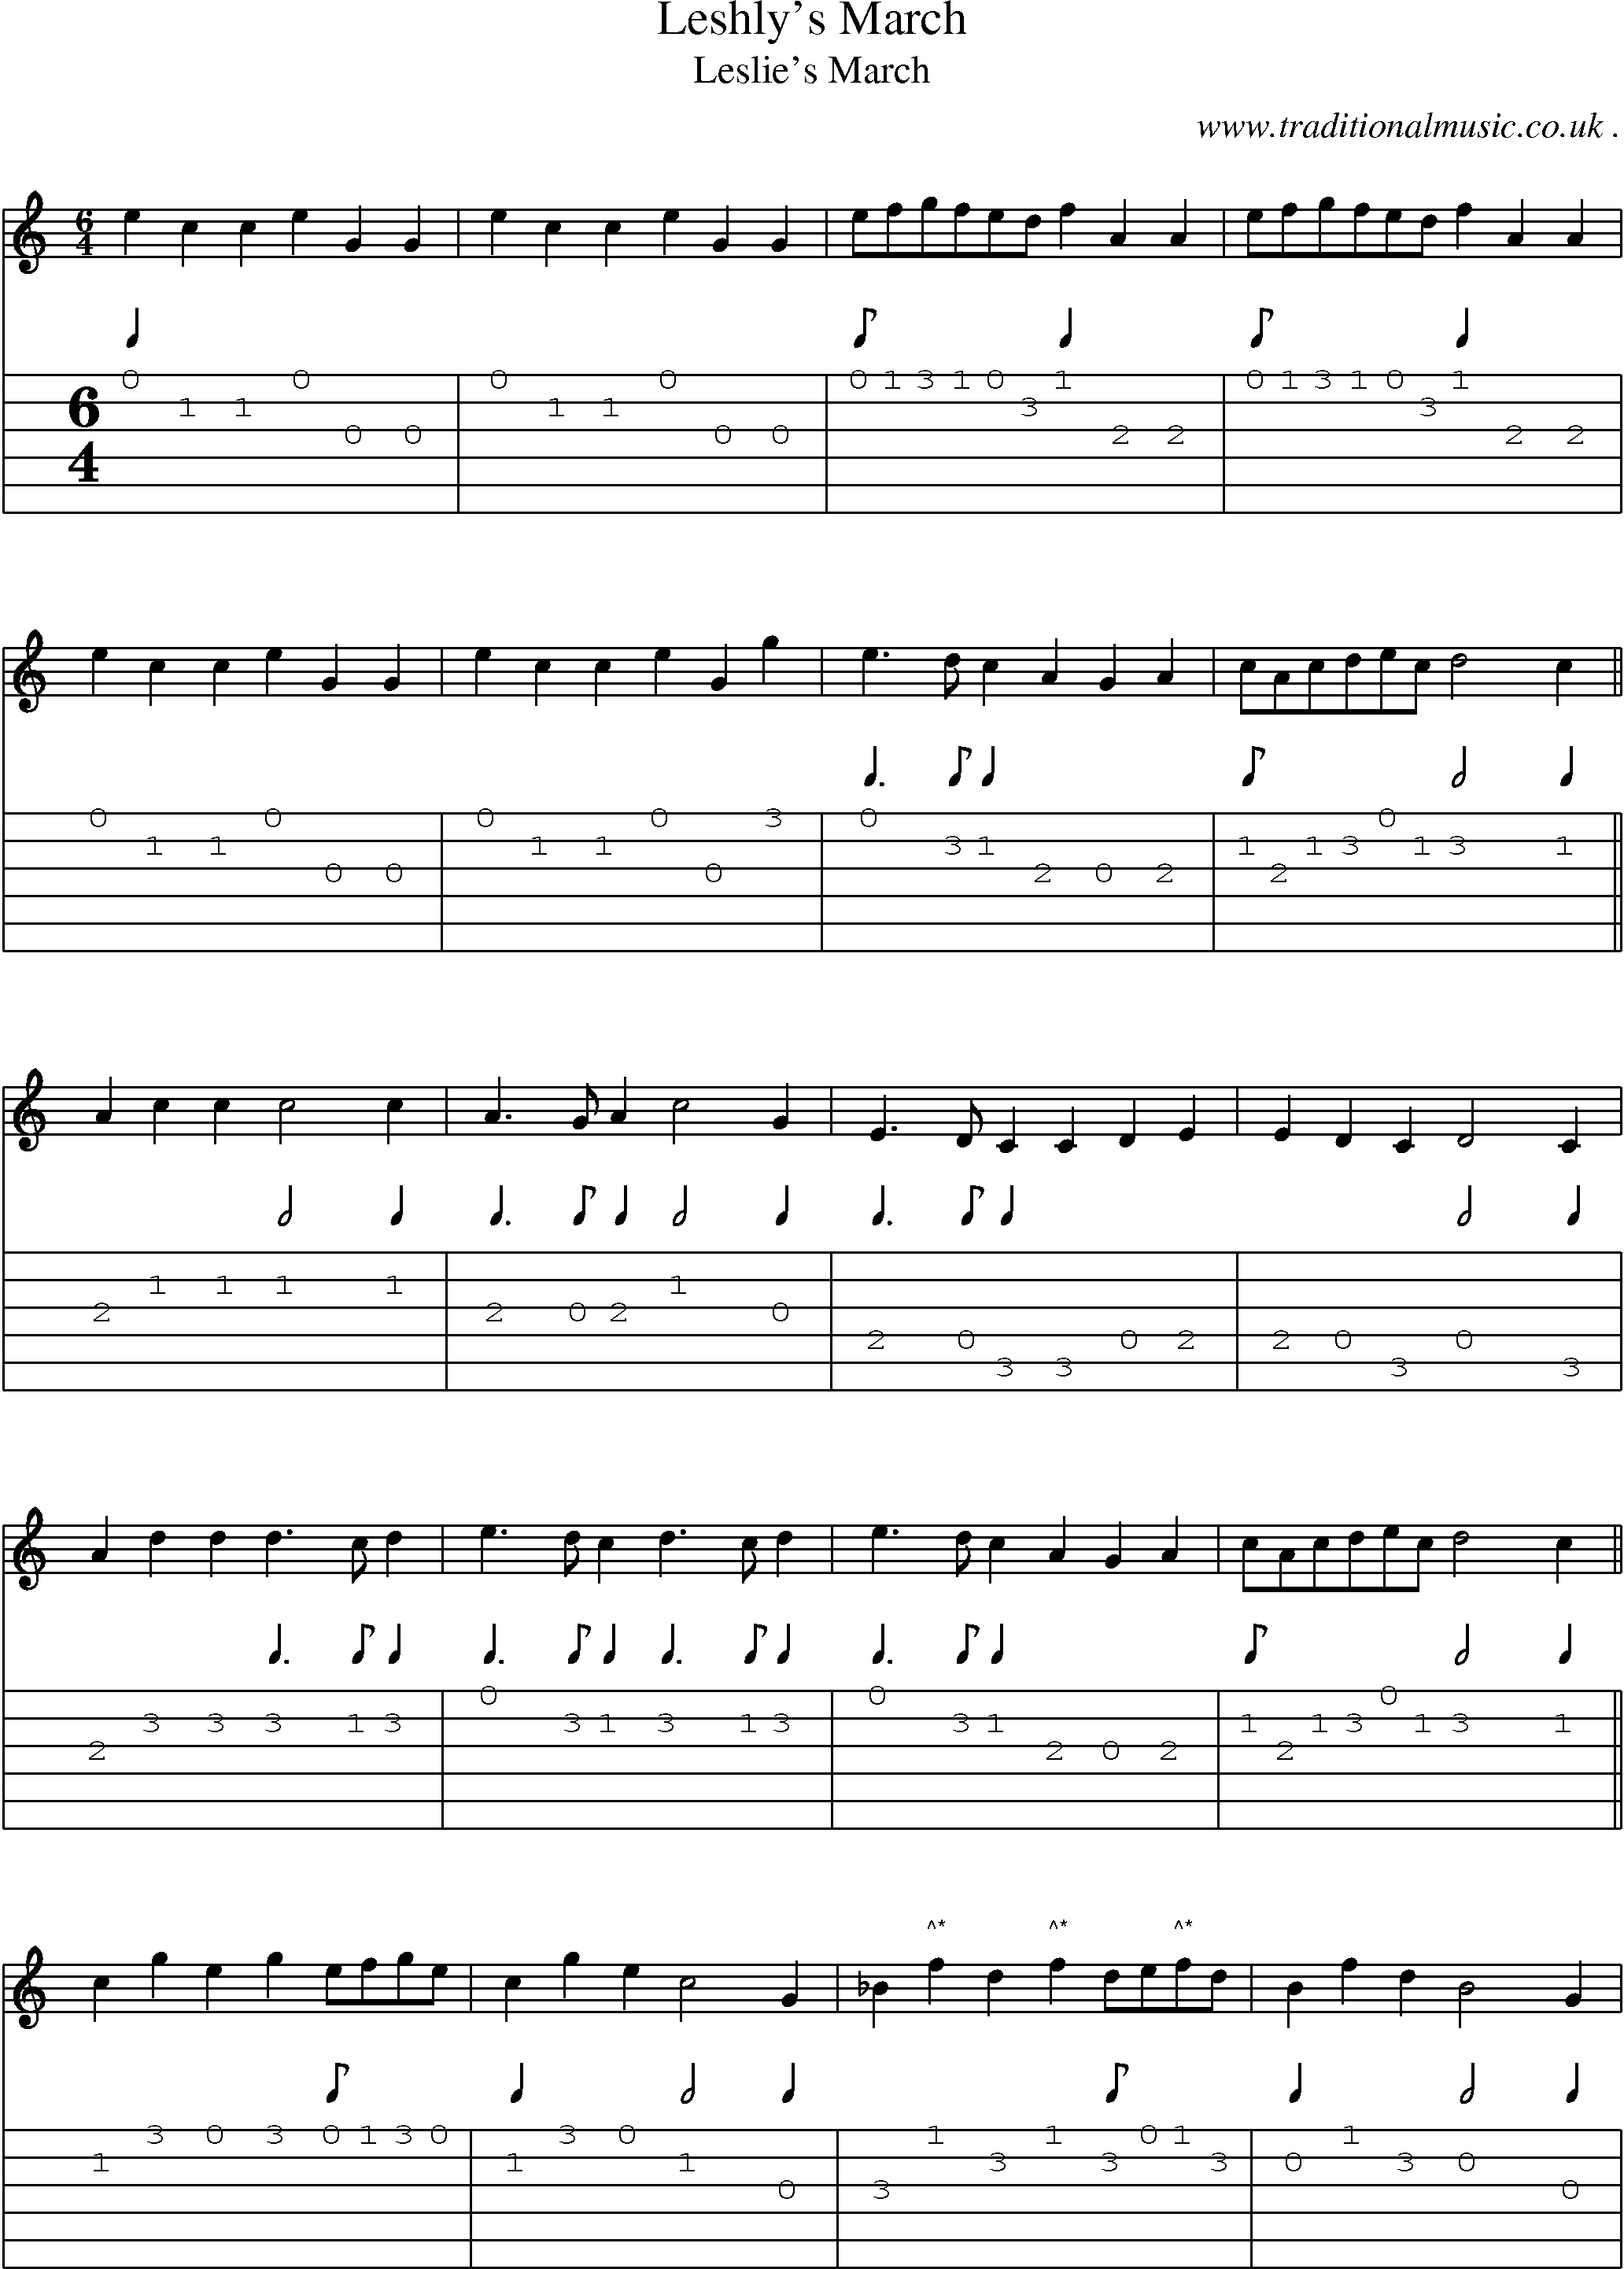 Sheet-Music and Guitar Tabs for Leshlys March